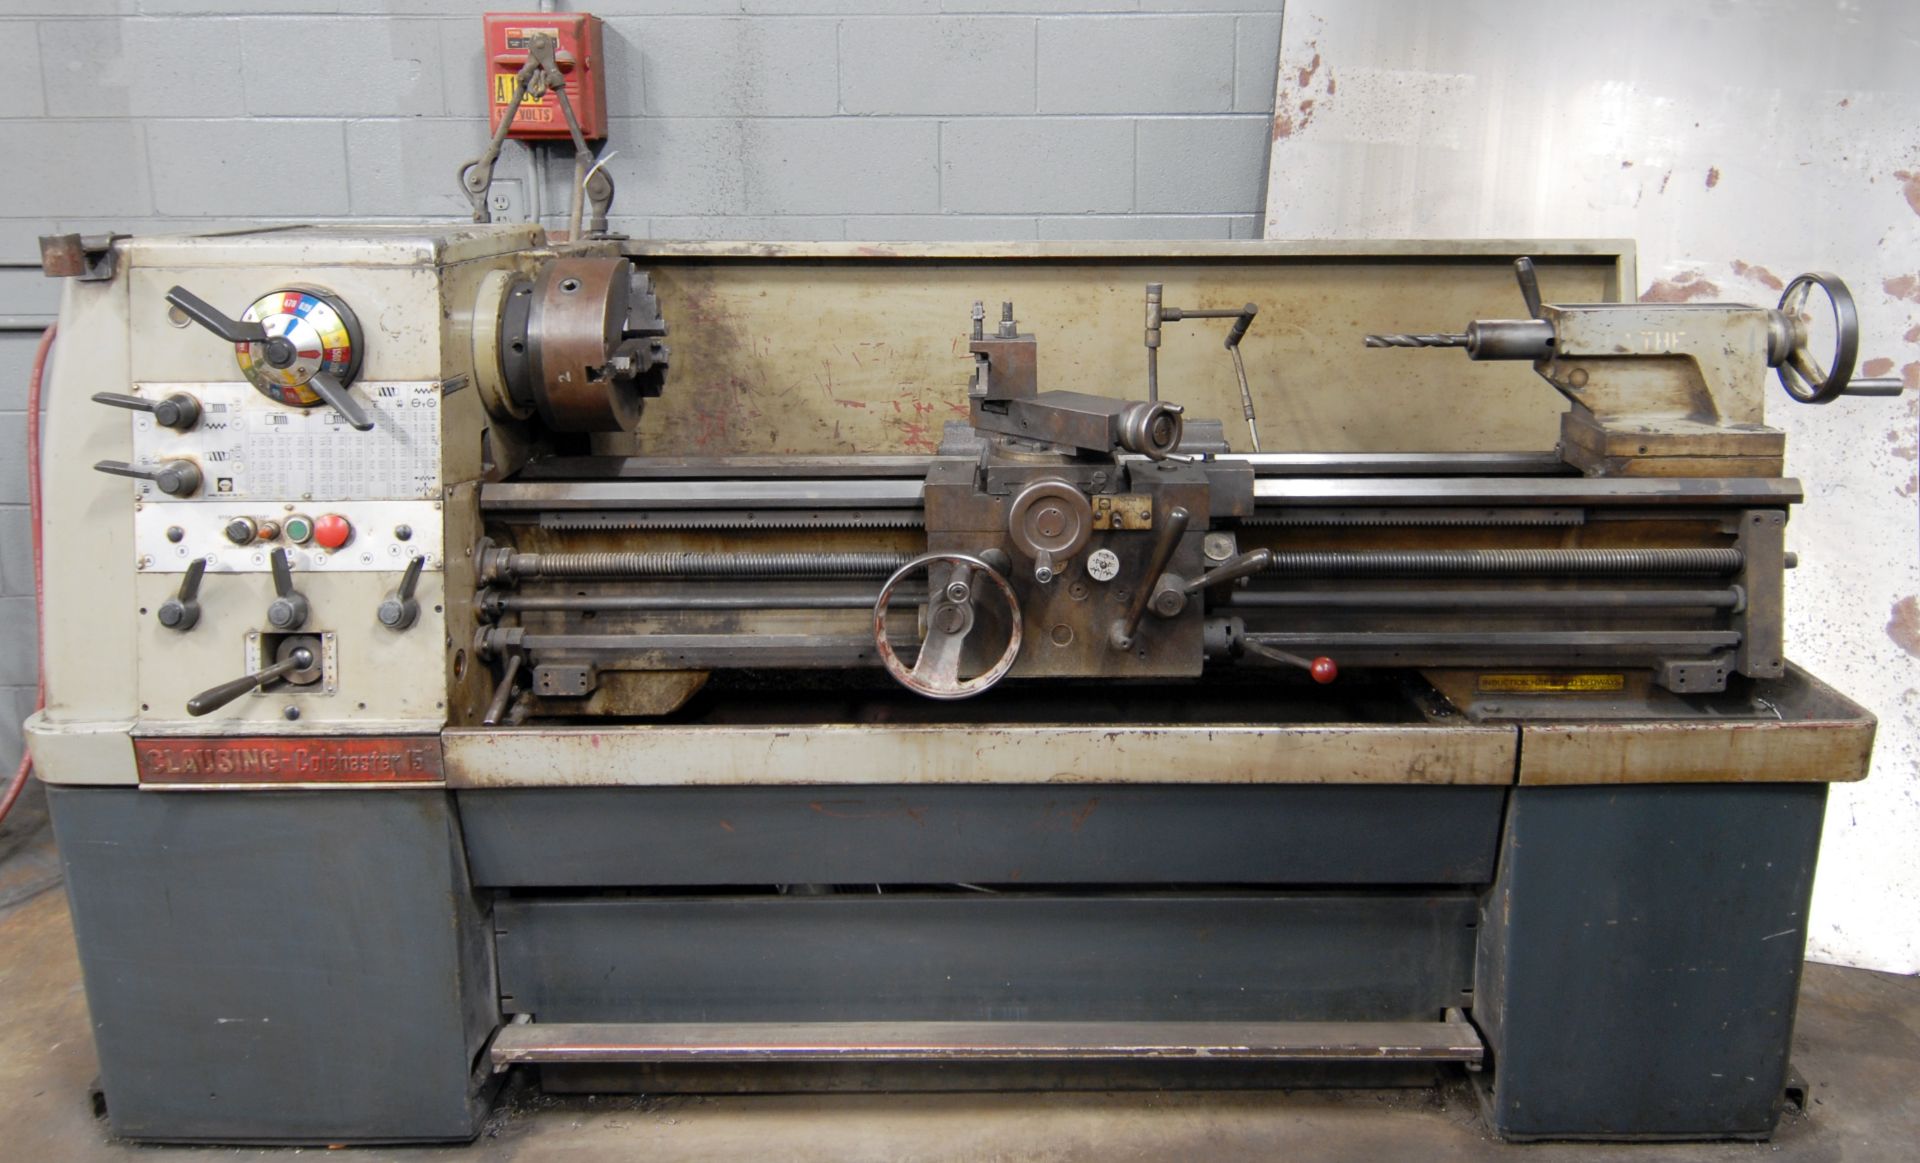 CLAUSING COLCHESTER # 15 ENGINE LATHE WITH 16" SWING, 50" BETWEEN CENTERS, 2" SPINDLE BORE, 10" 3